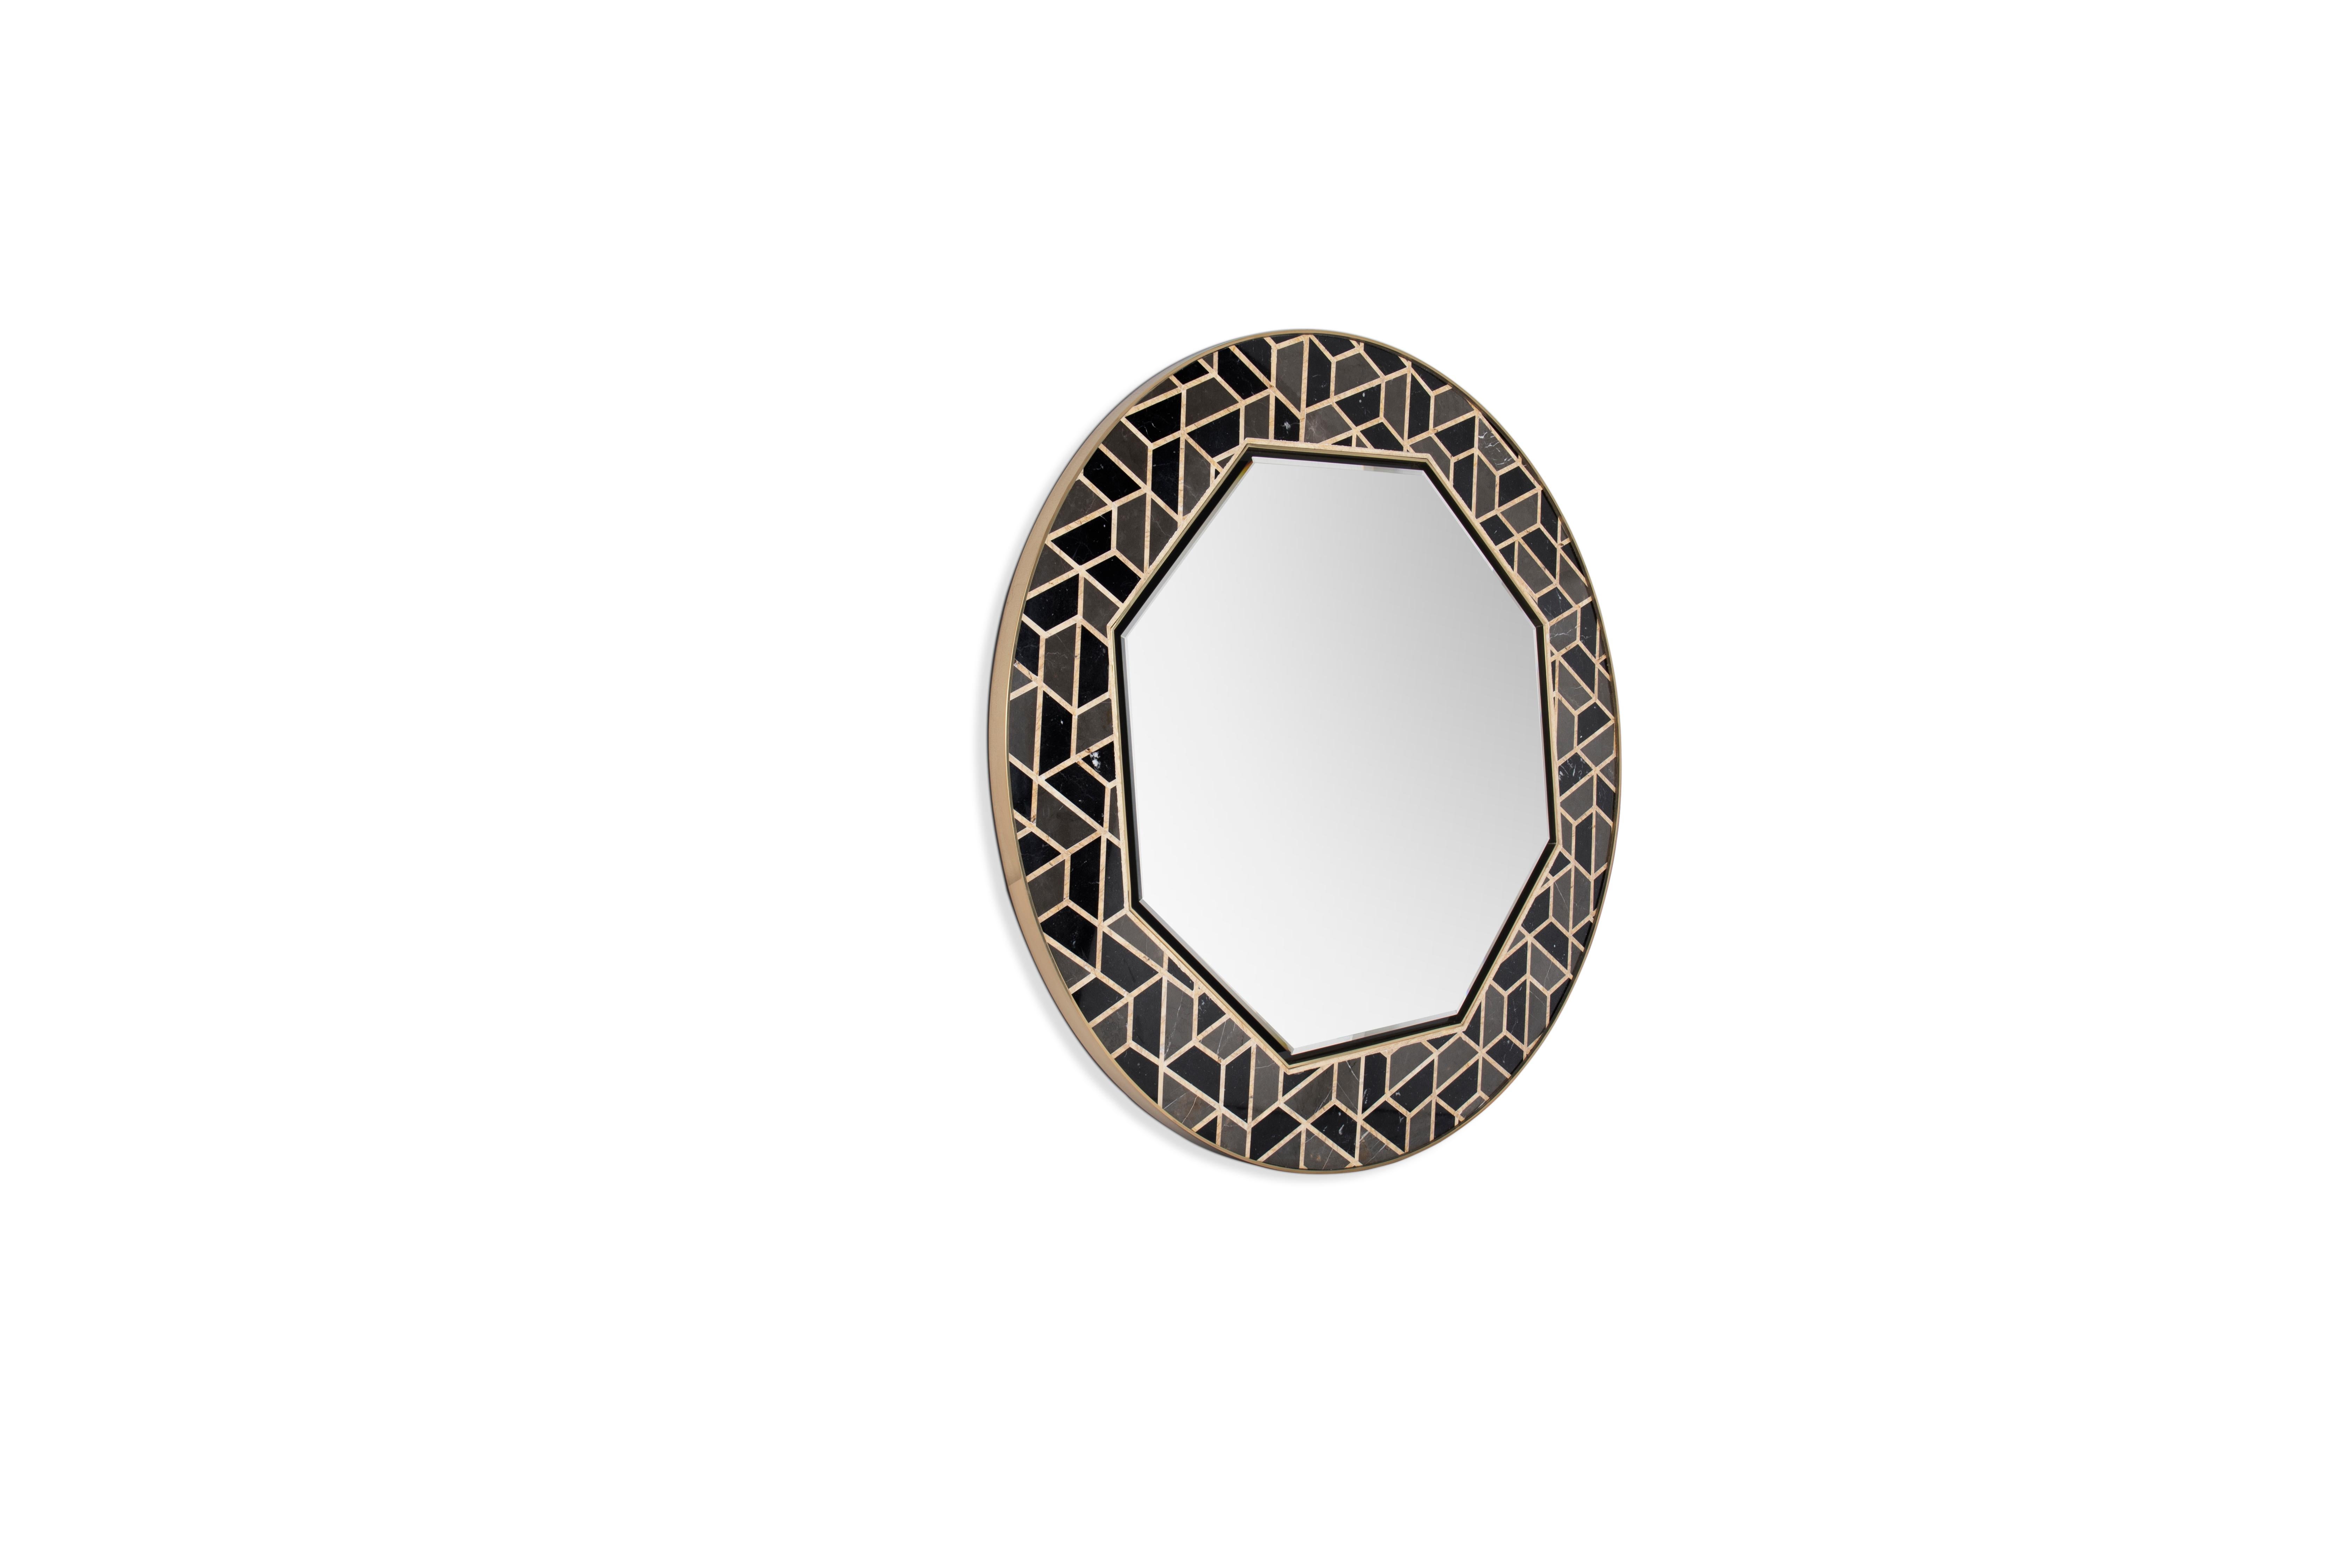 This unique mirror is inspired in the tortoises hard outer shell. It's made of high gloss black lacquered wood that contrasts with hexagonal Anthracite, Nero Marquina and Yellow Triano marble details. This glamorous pattern makes this piece easy to